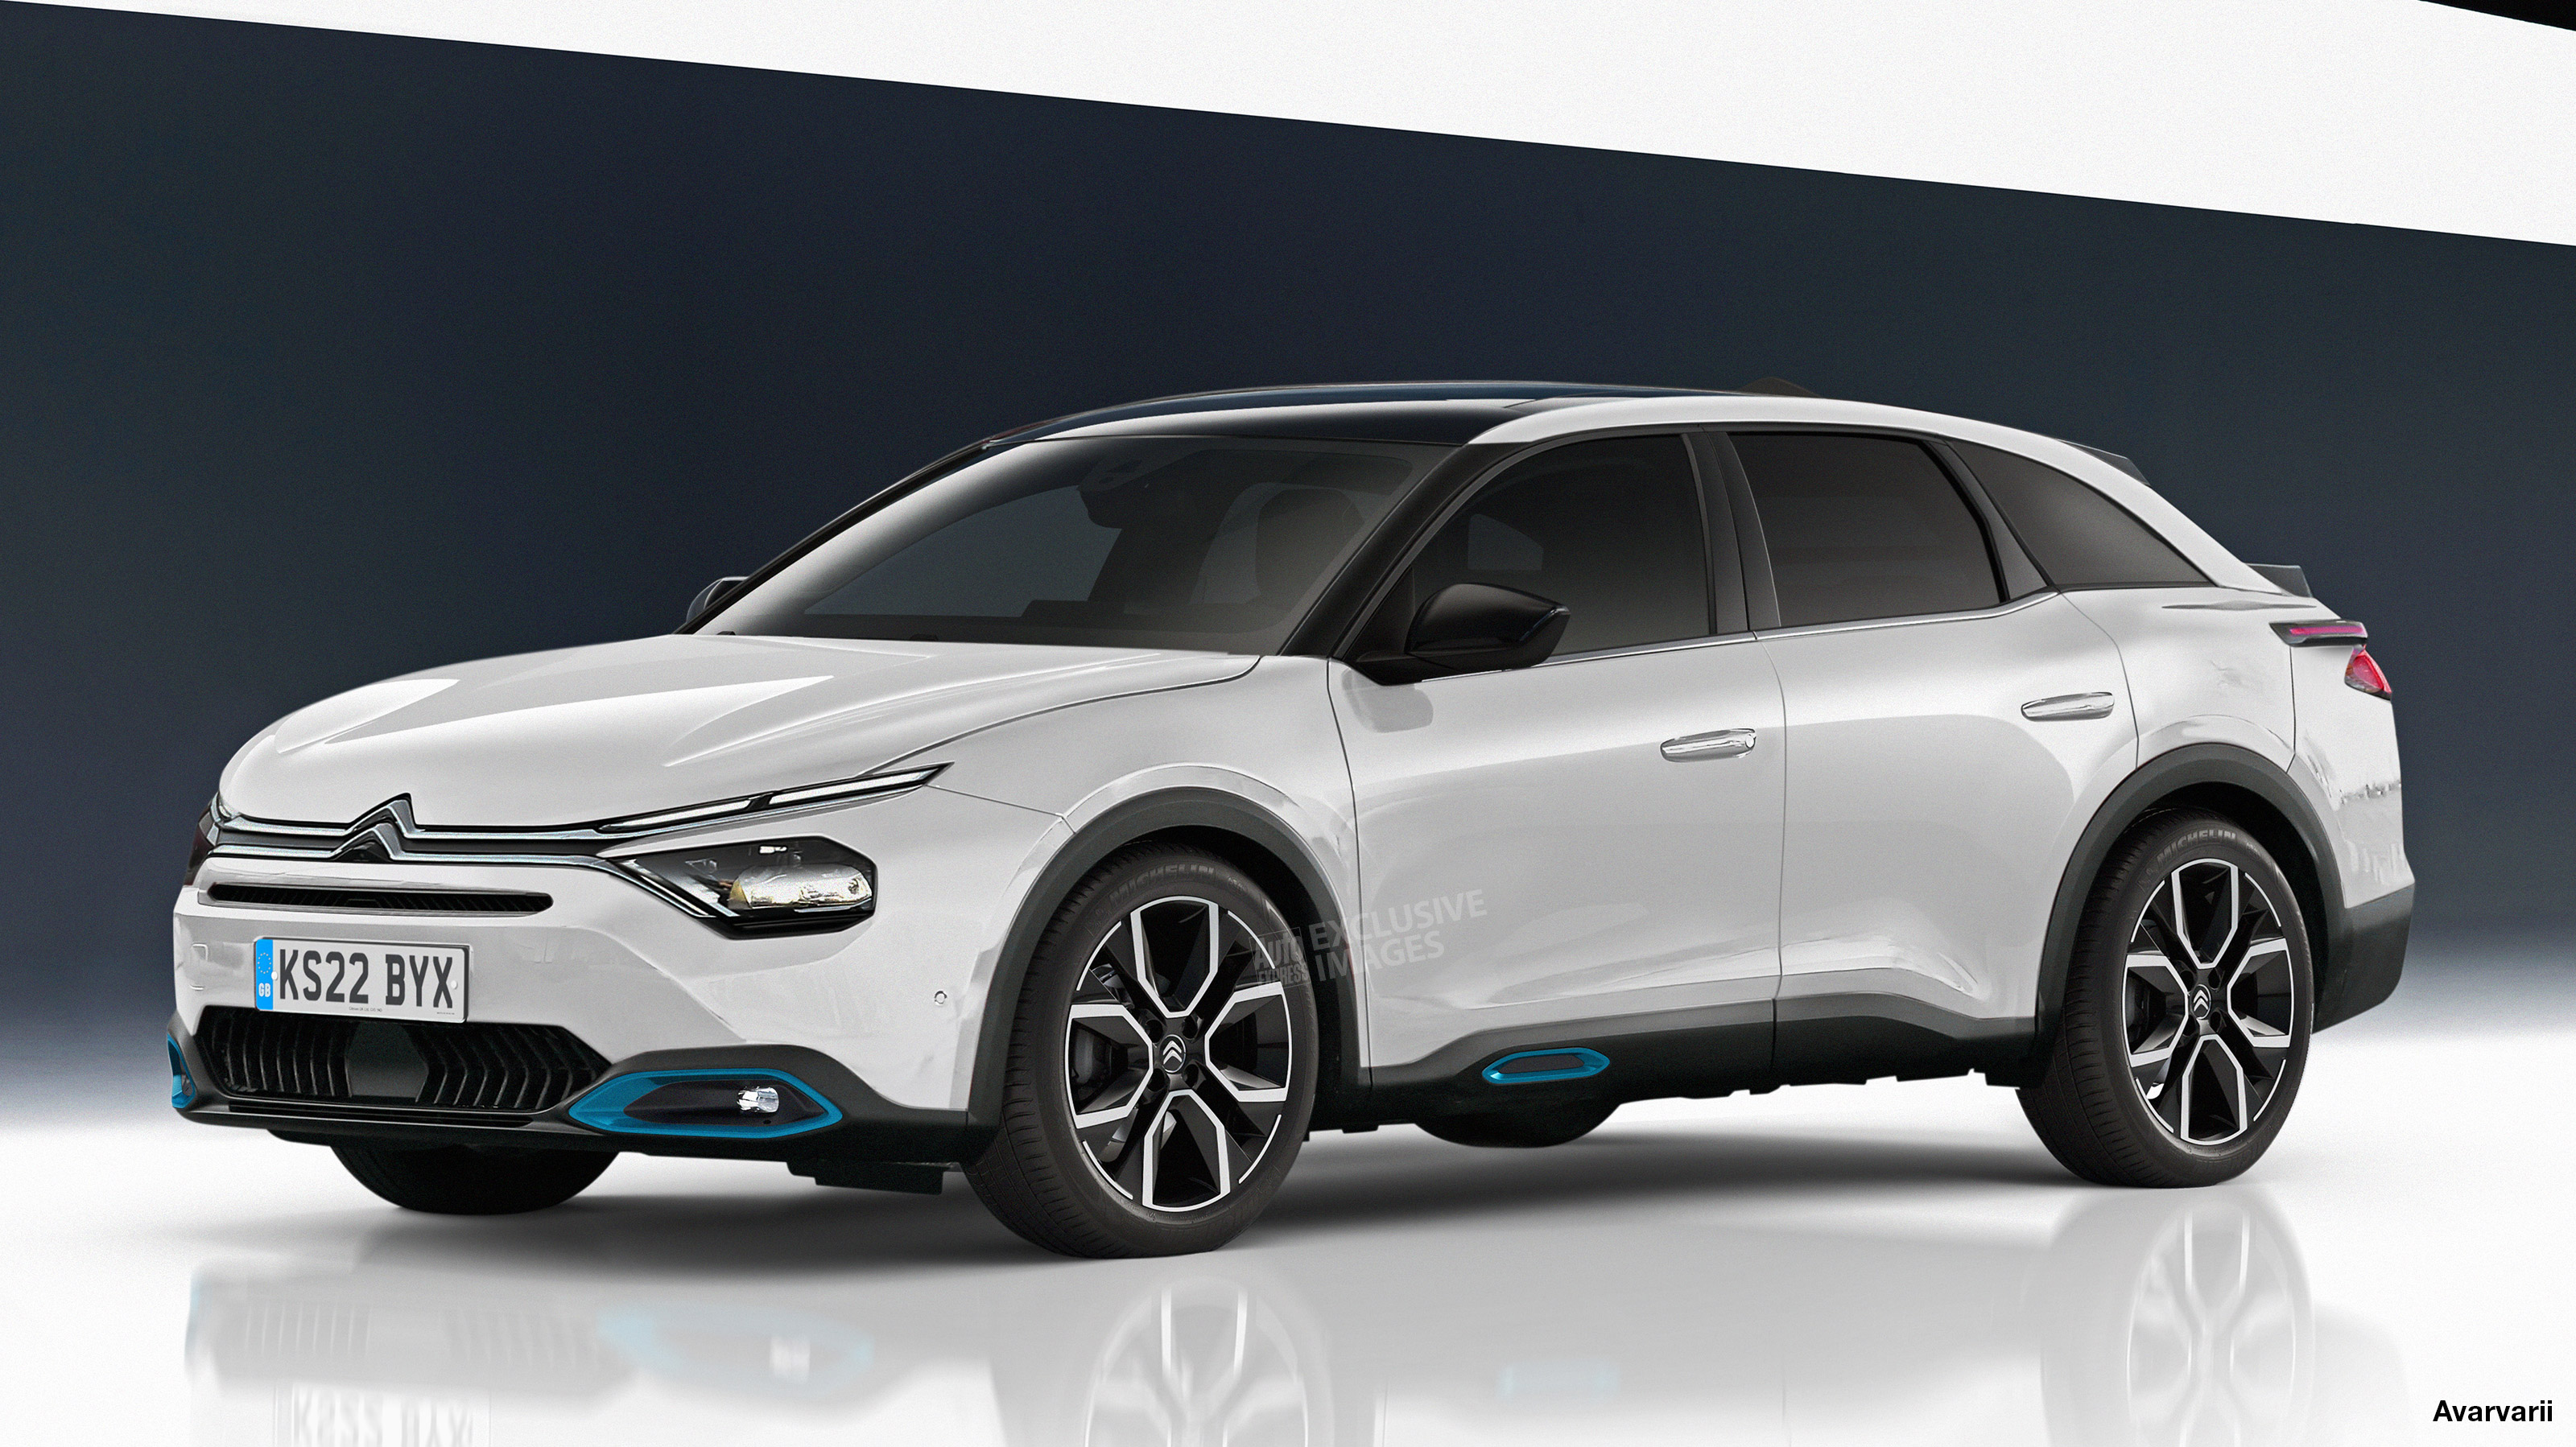 New 2021 Citroen flagship on the way with SUV inspiration